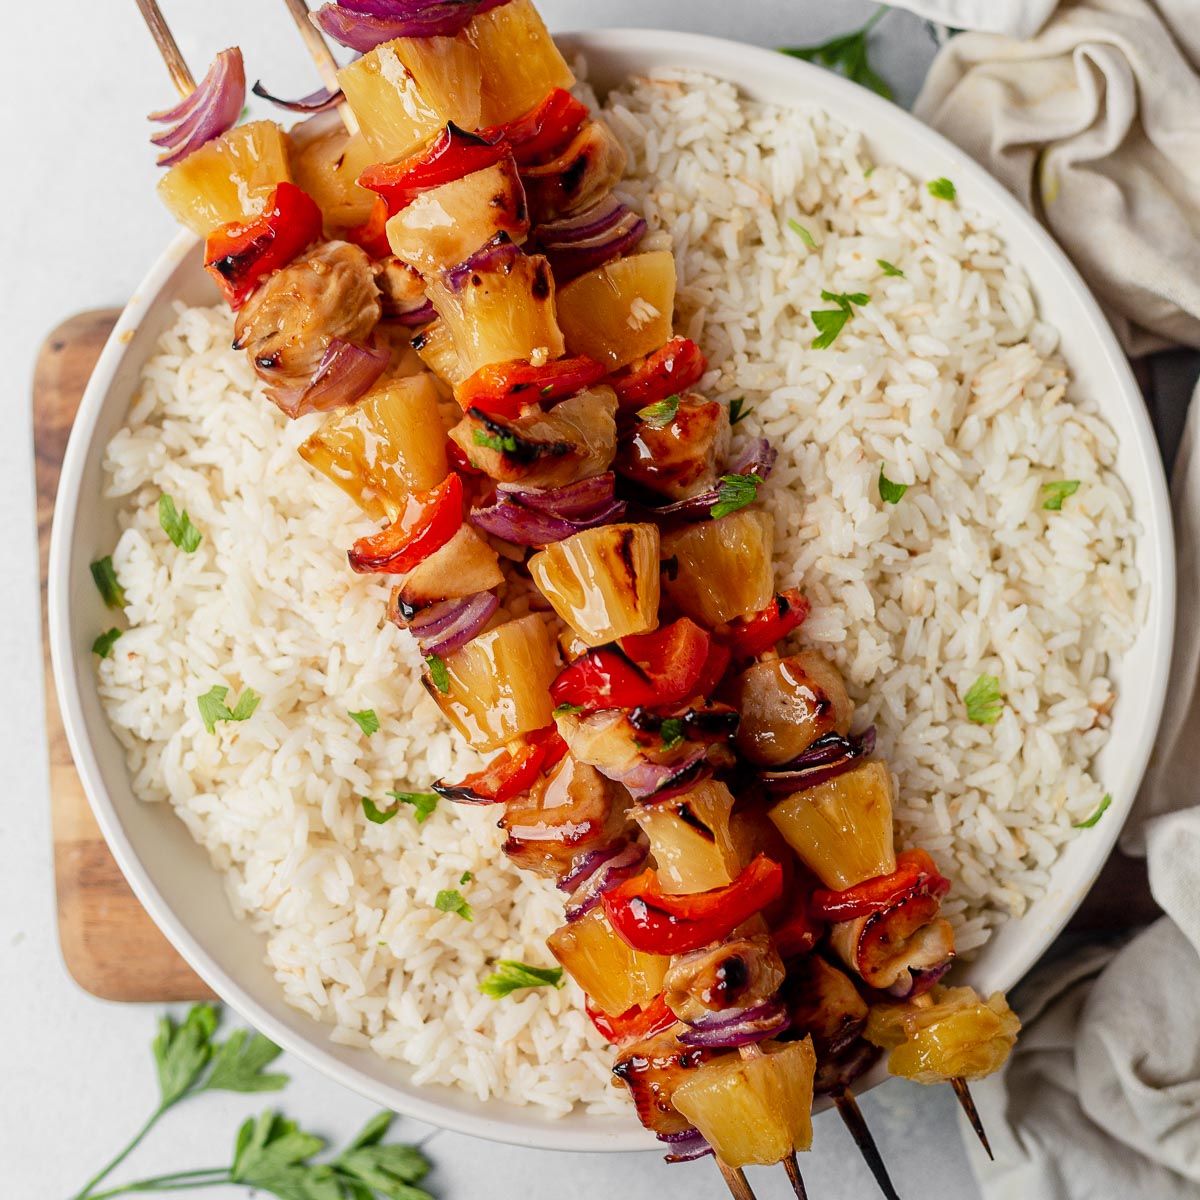 Skewered Pineapple Chicken Recipe with Spicy Orange Marinade - The Weary  Chef